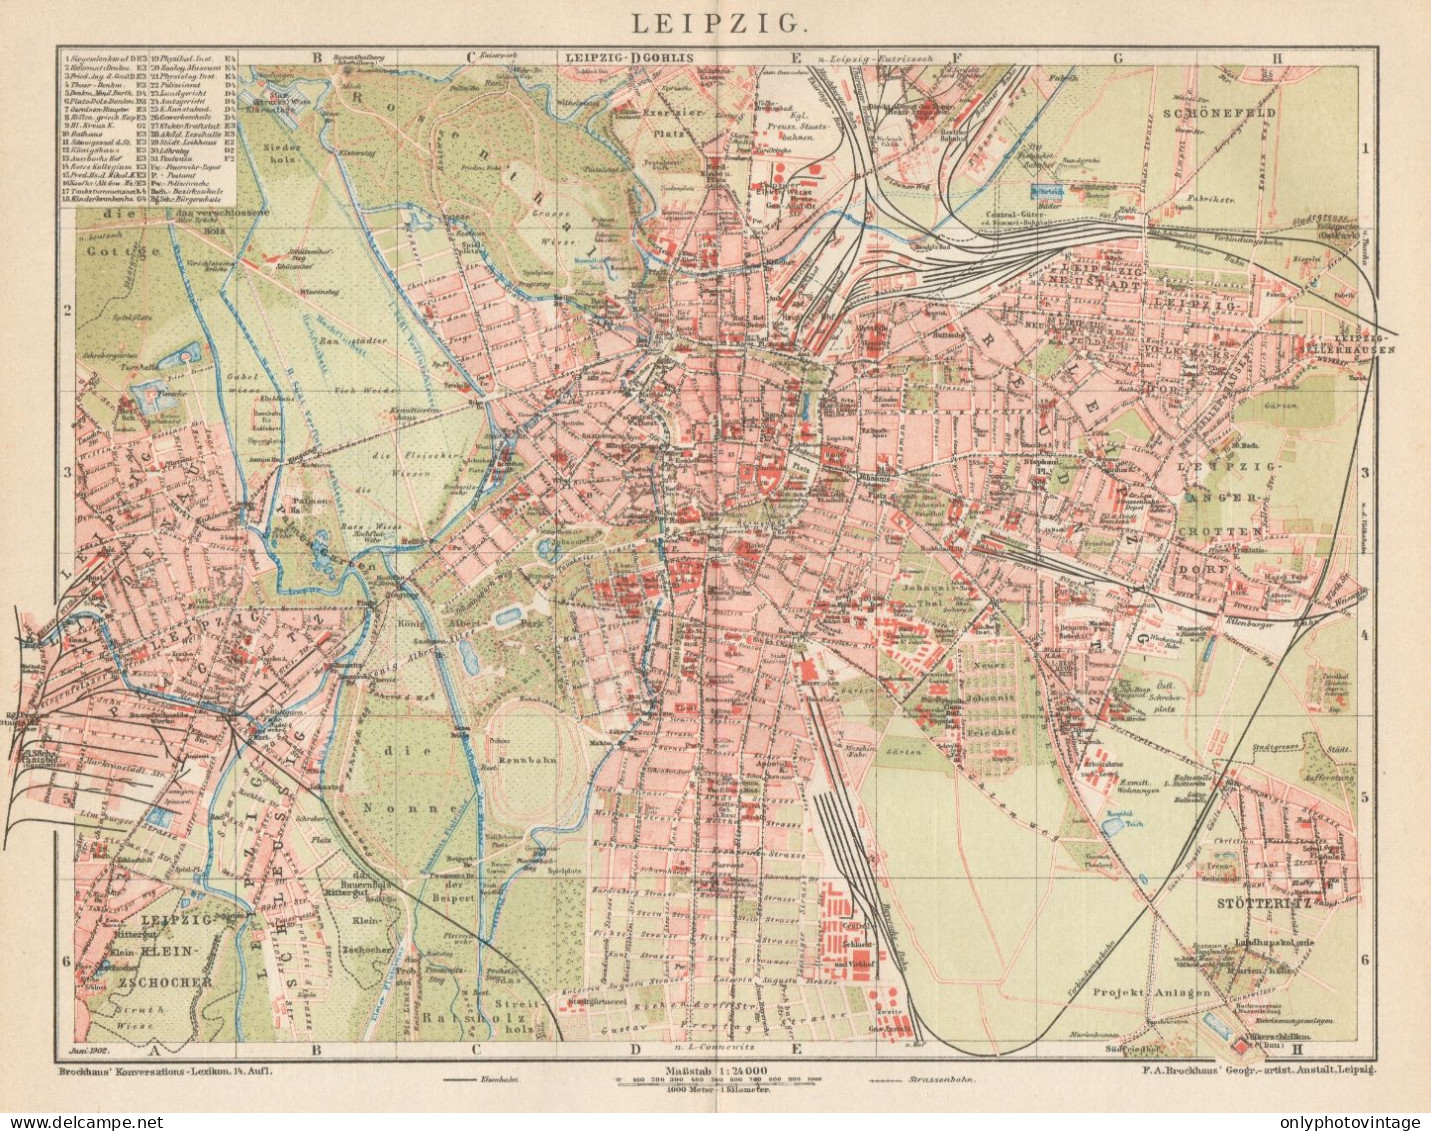 B6271 Germany - Leipzig Town Plan - Carta Geografica Antica Del 1902 - Old Map - Cartes Géographiques